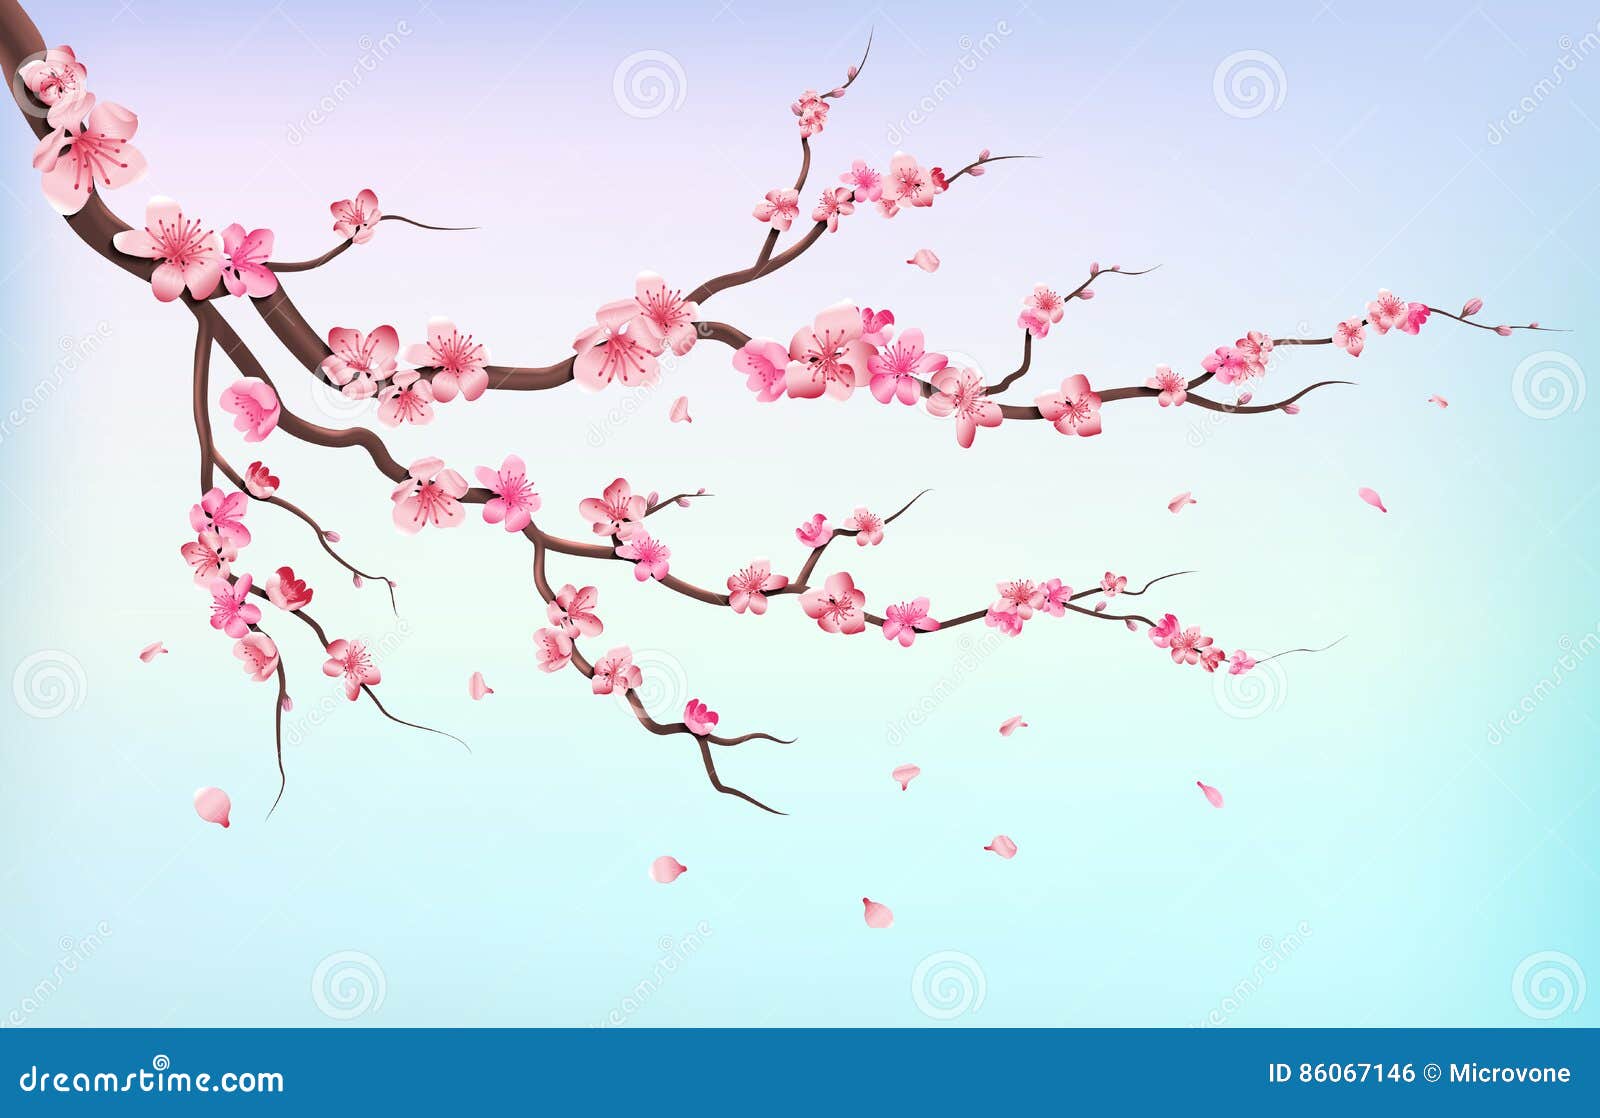 japan sakura branches with cherry blossom flowers and falling petals  on white background  